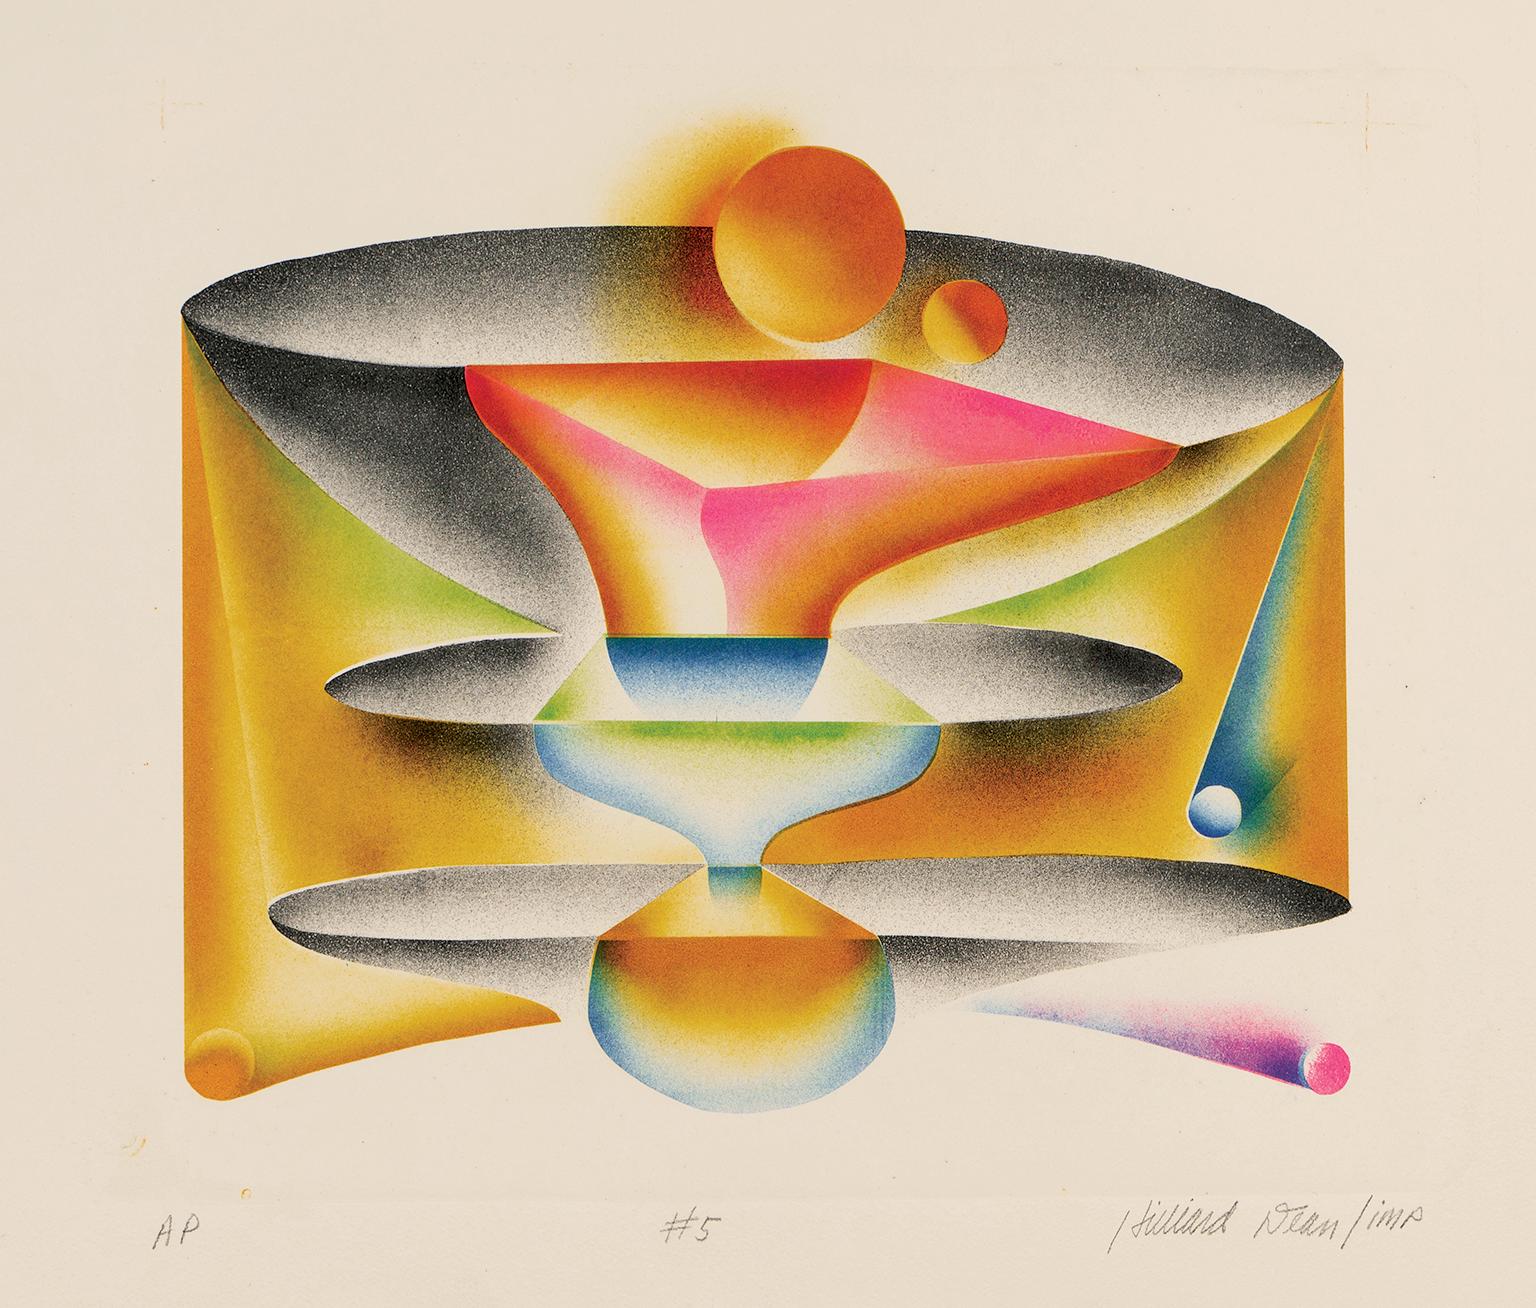 Hilliard Dean Abstract Print - #5 — Modernist Abstraction — African American Artist